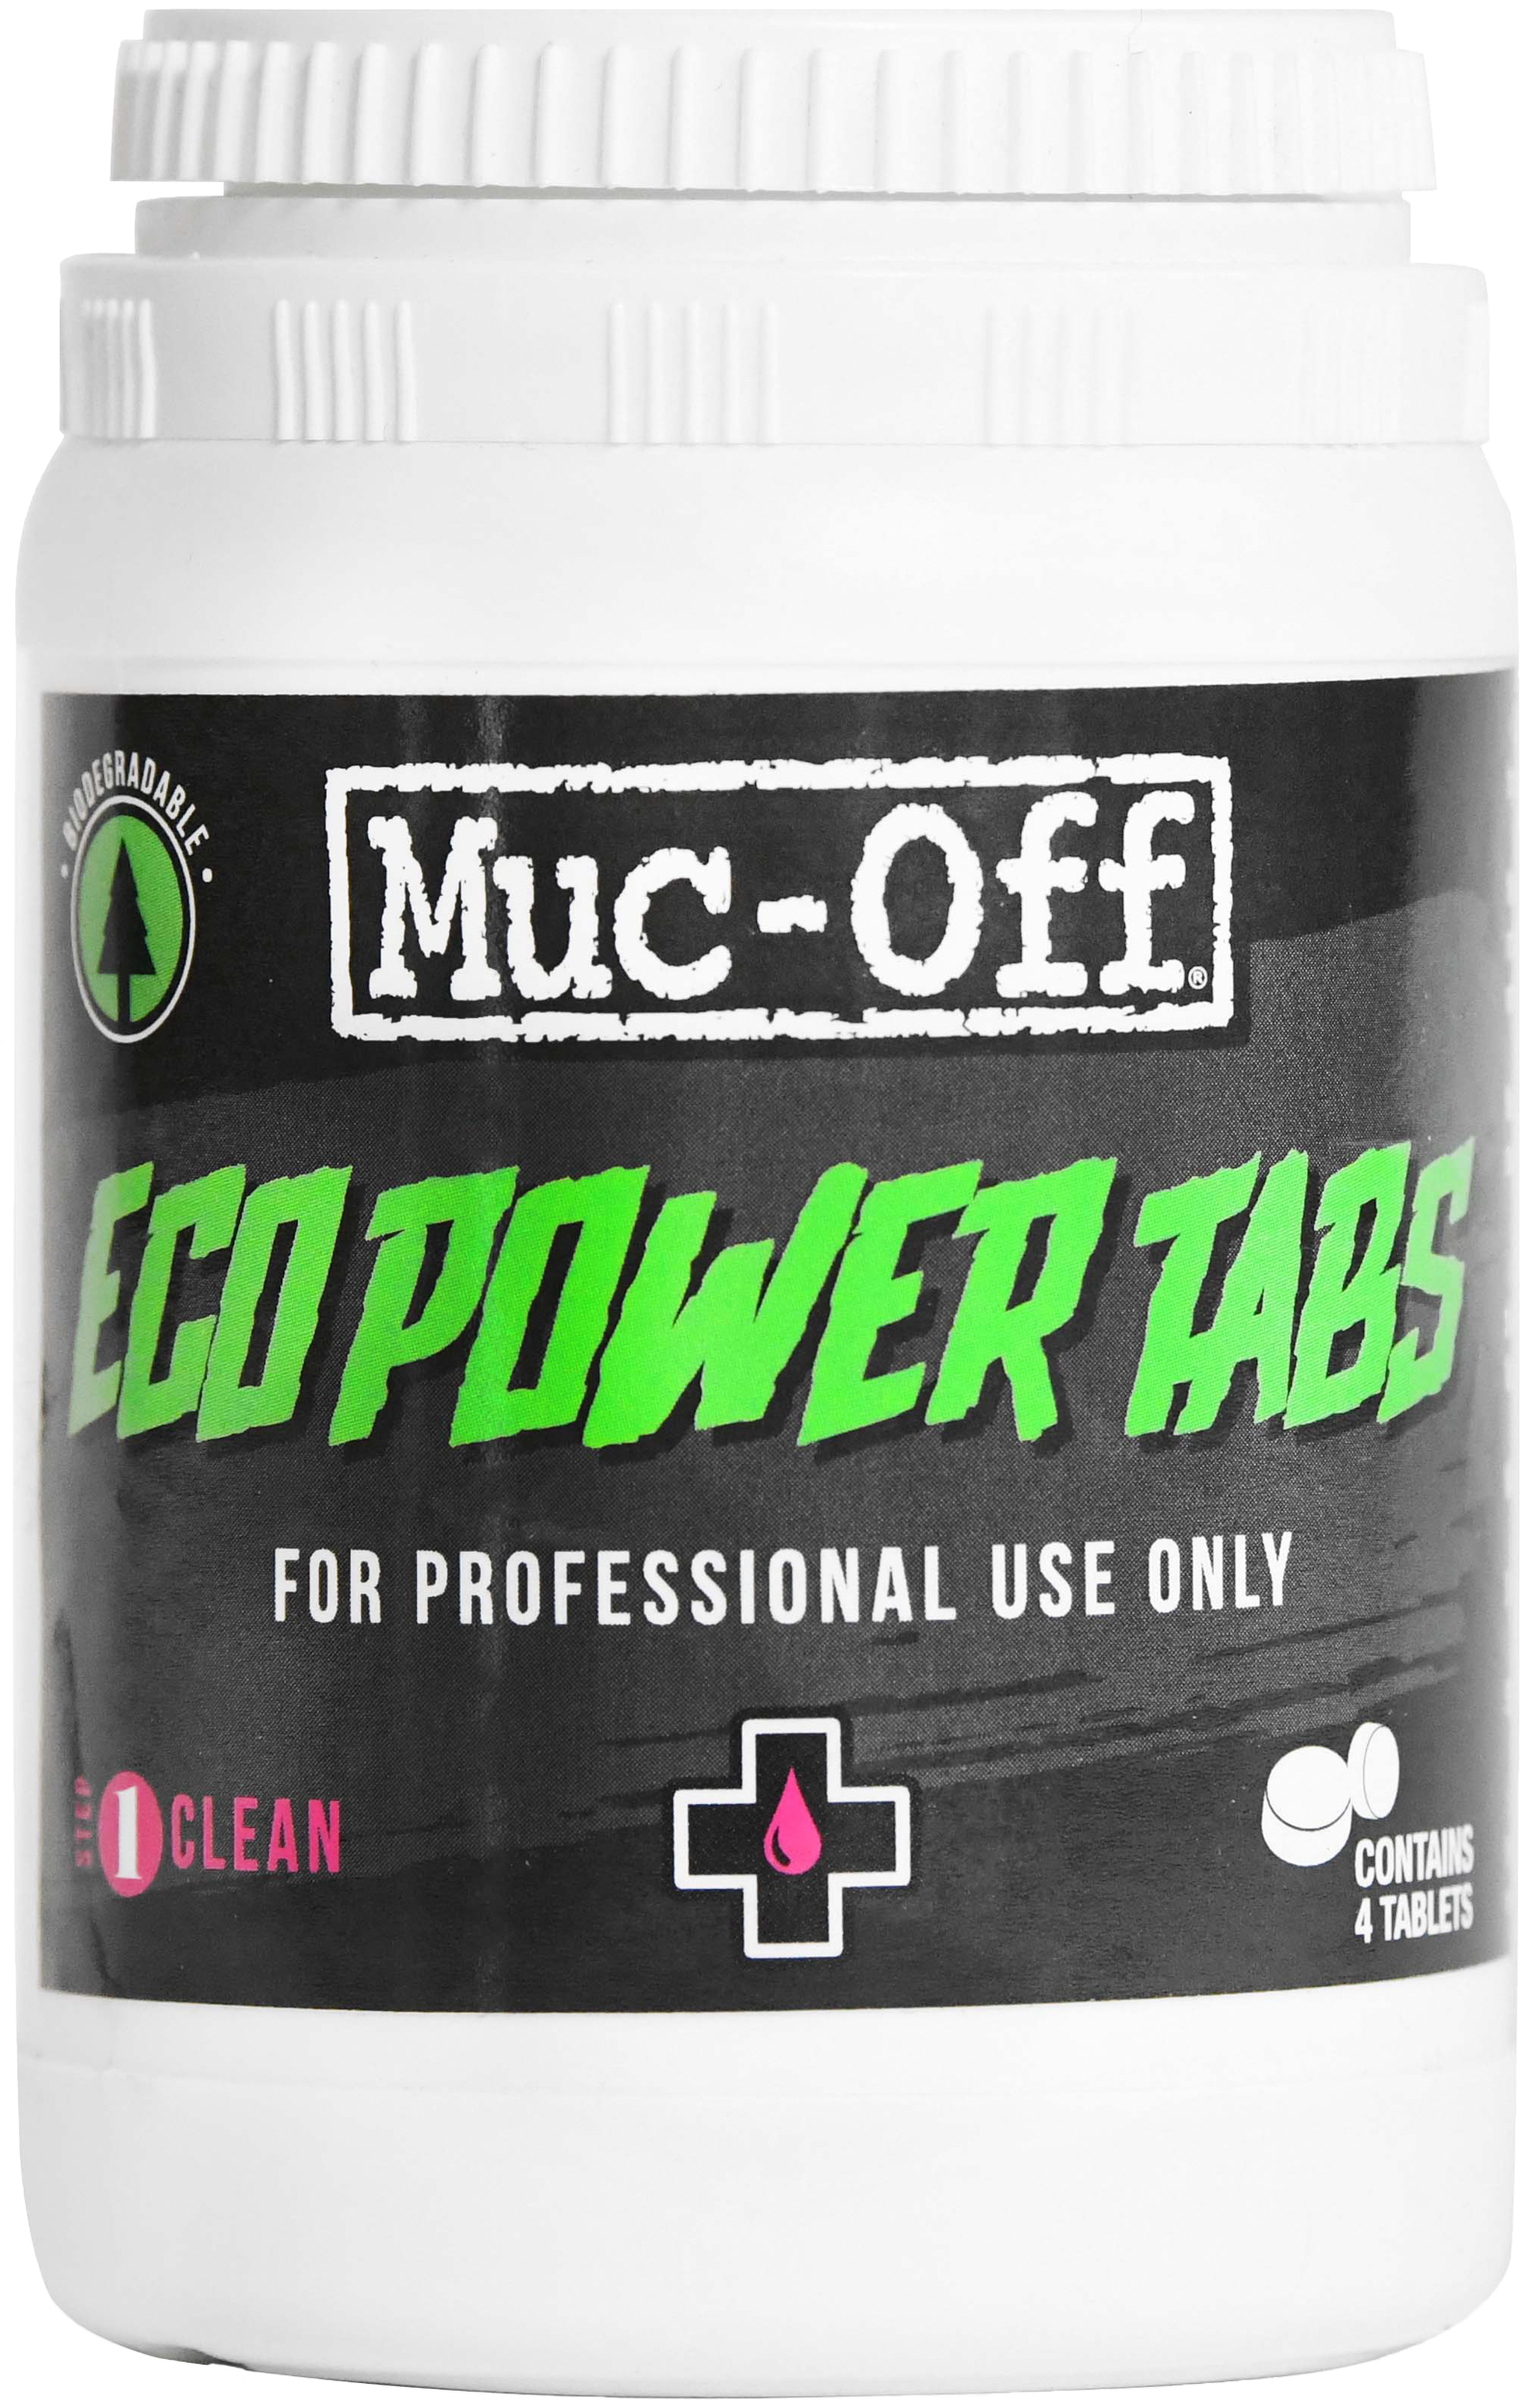 Muc-off - Eco Parts Washer Power Tabs 4 Tablets - 20091US